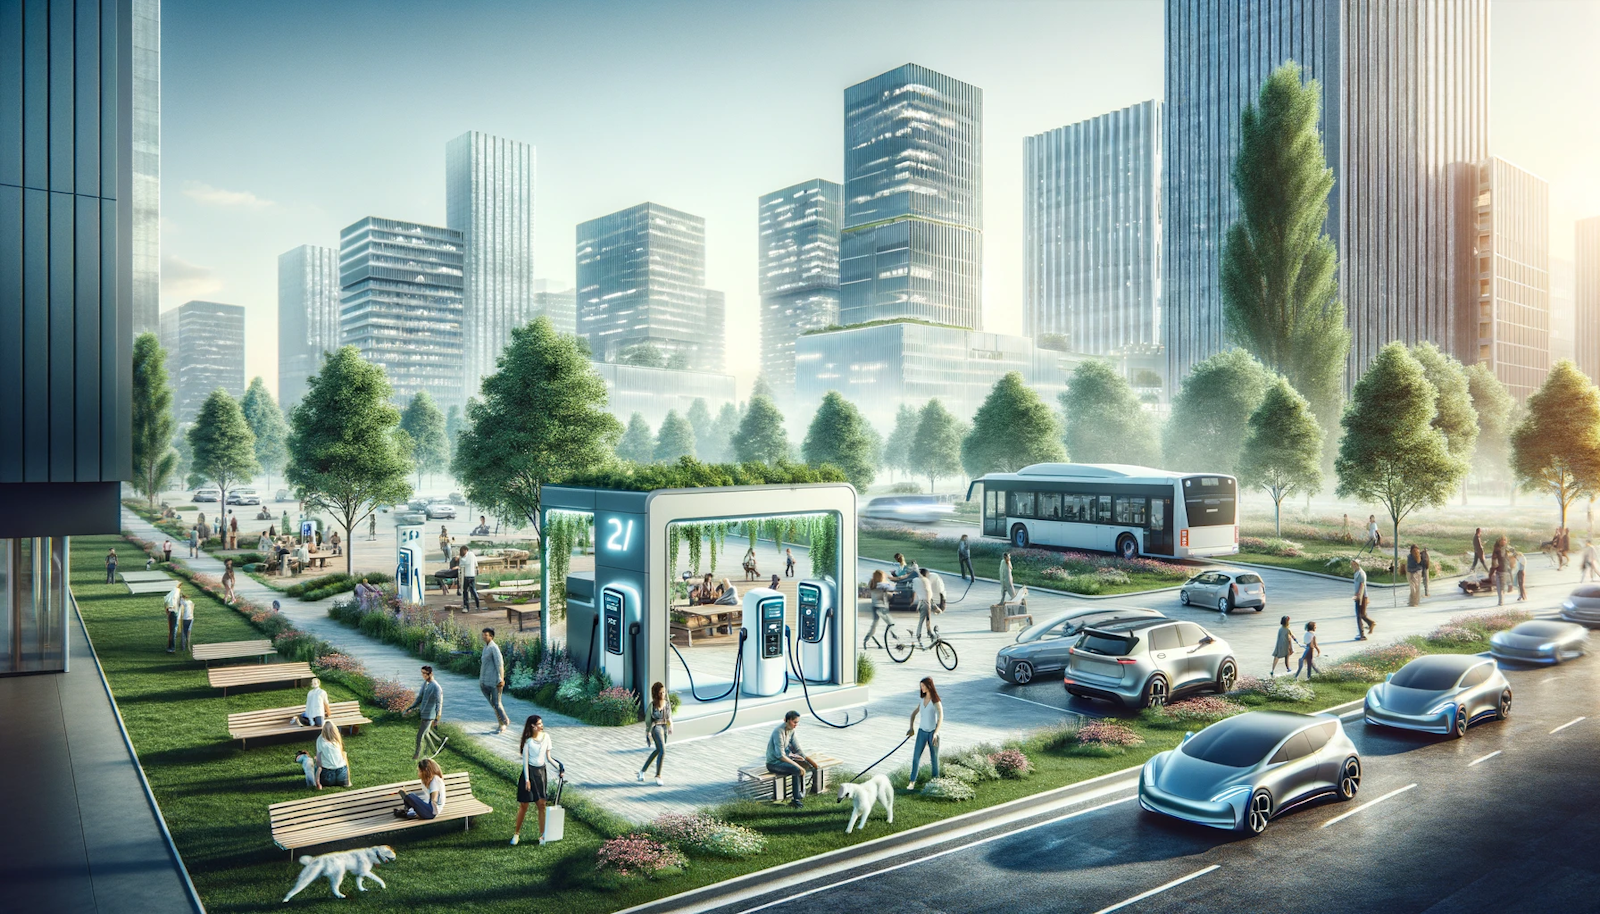 Urban park with an integrated electric vehicle charging station, surrounded by people and pets enjoying the green space, framed by tall city buildings, exemplifying sustainable urban living.